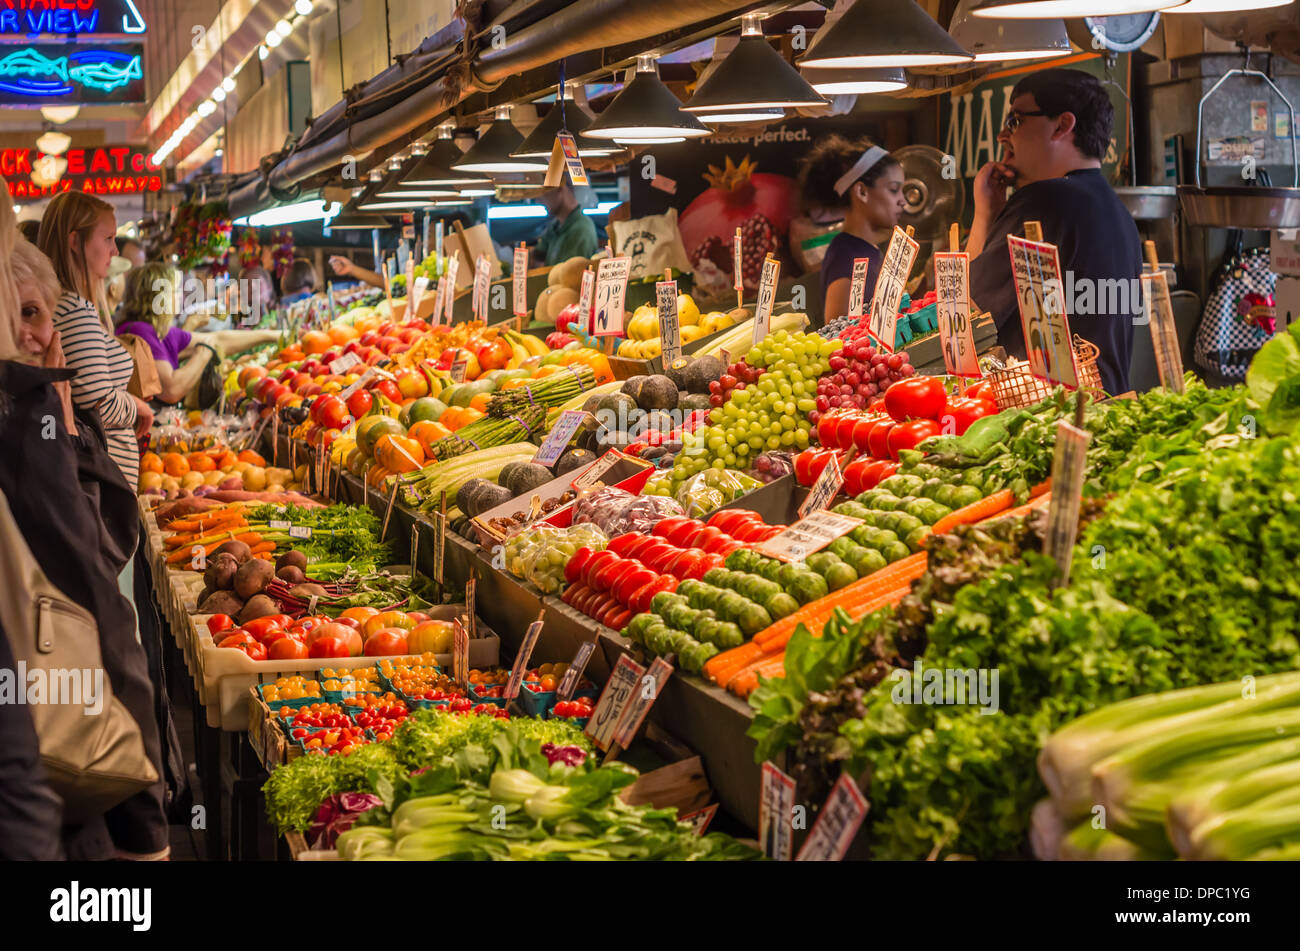 Shoppers with a display of fruits and vegetables with signs at a produce market stall Pike Place Market Seattle, Washington, USA Stock Photo